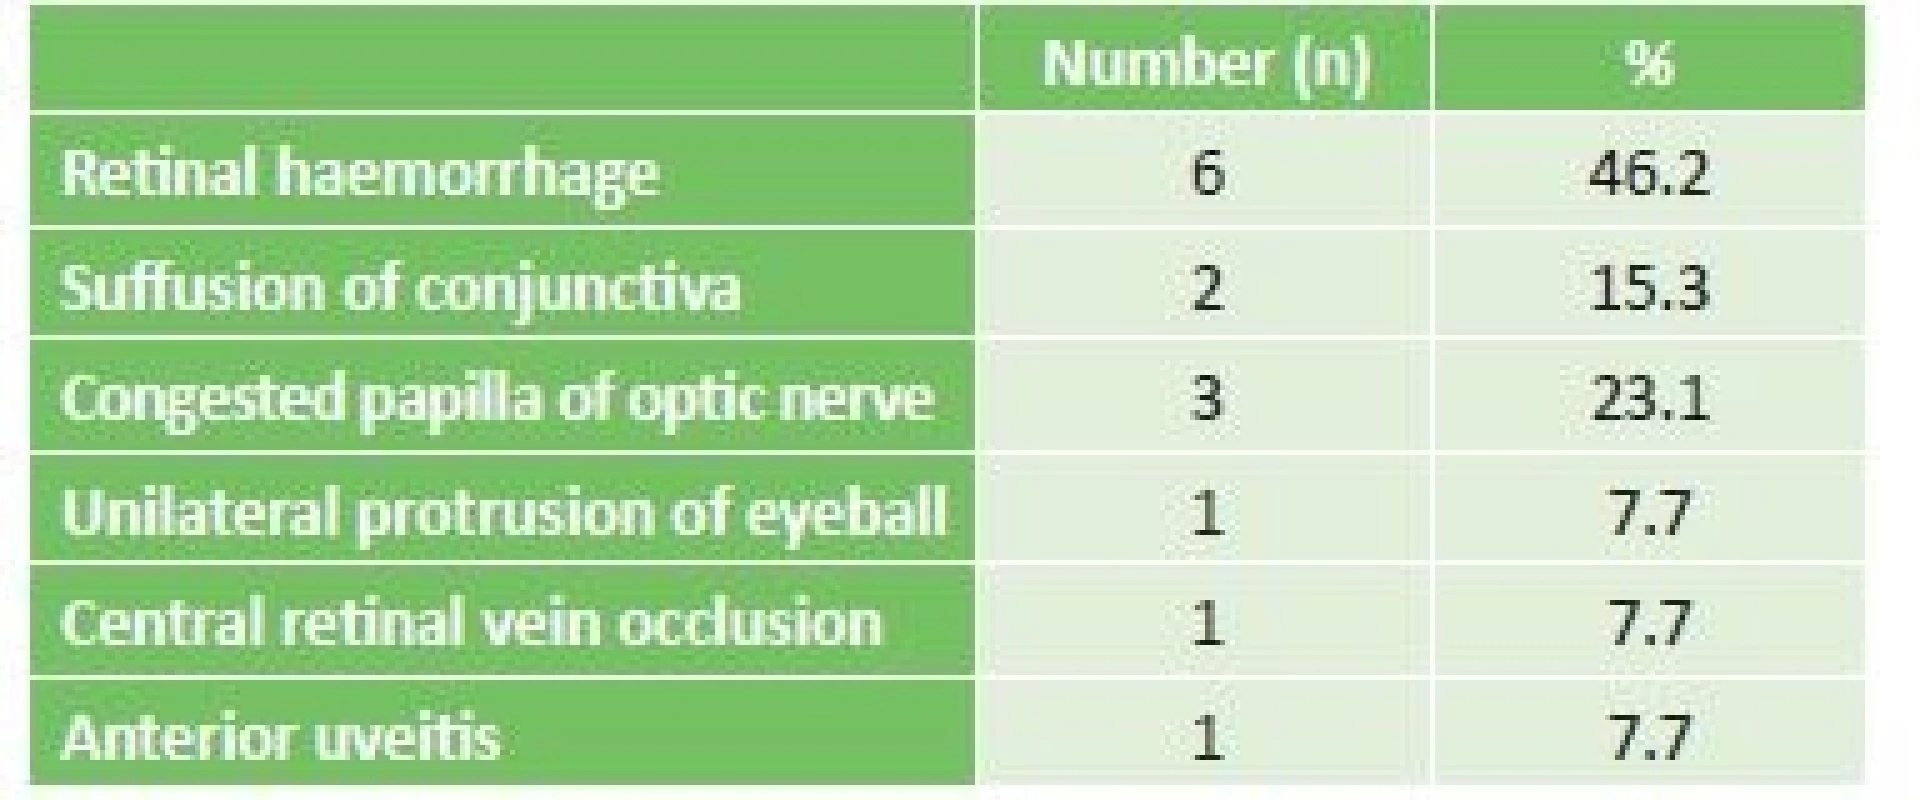 Acute ocular symptoms in patients with leukaemia in
our cohort.